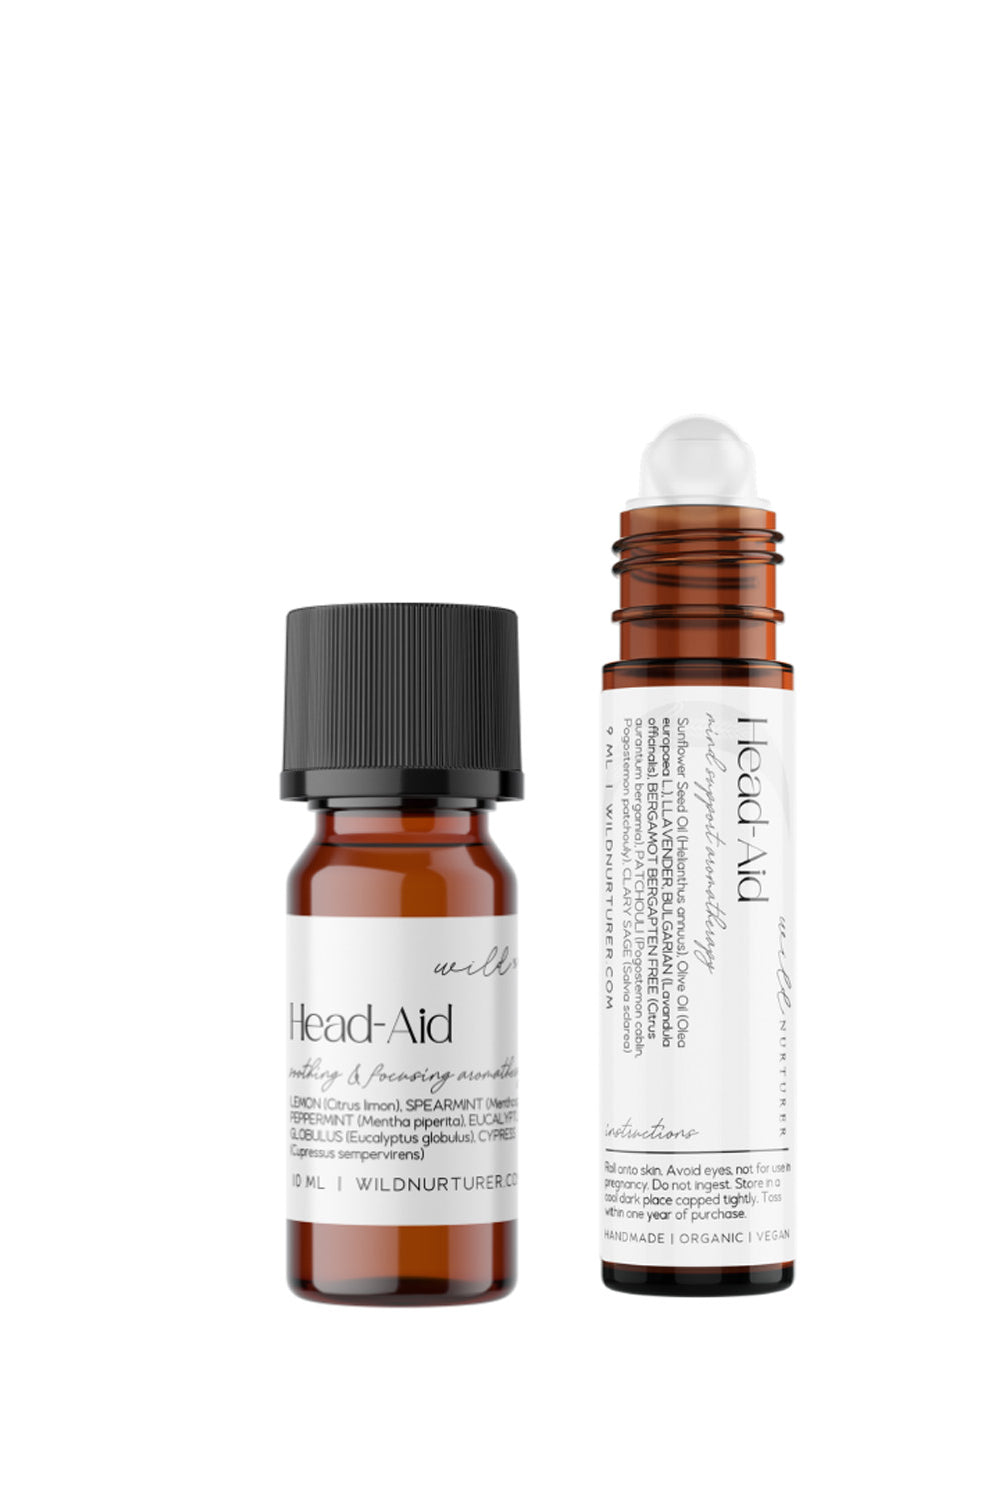 Two Head-Aid: Tension Relief Aromatherapy roller bottles on a white background, one standing upright and the other laying horizontally with a label visible.